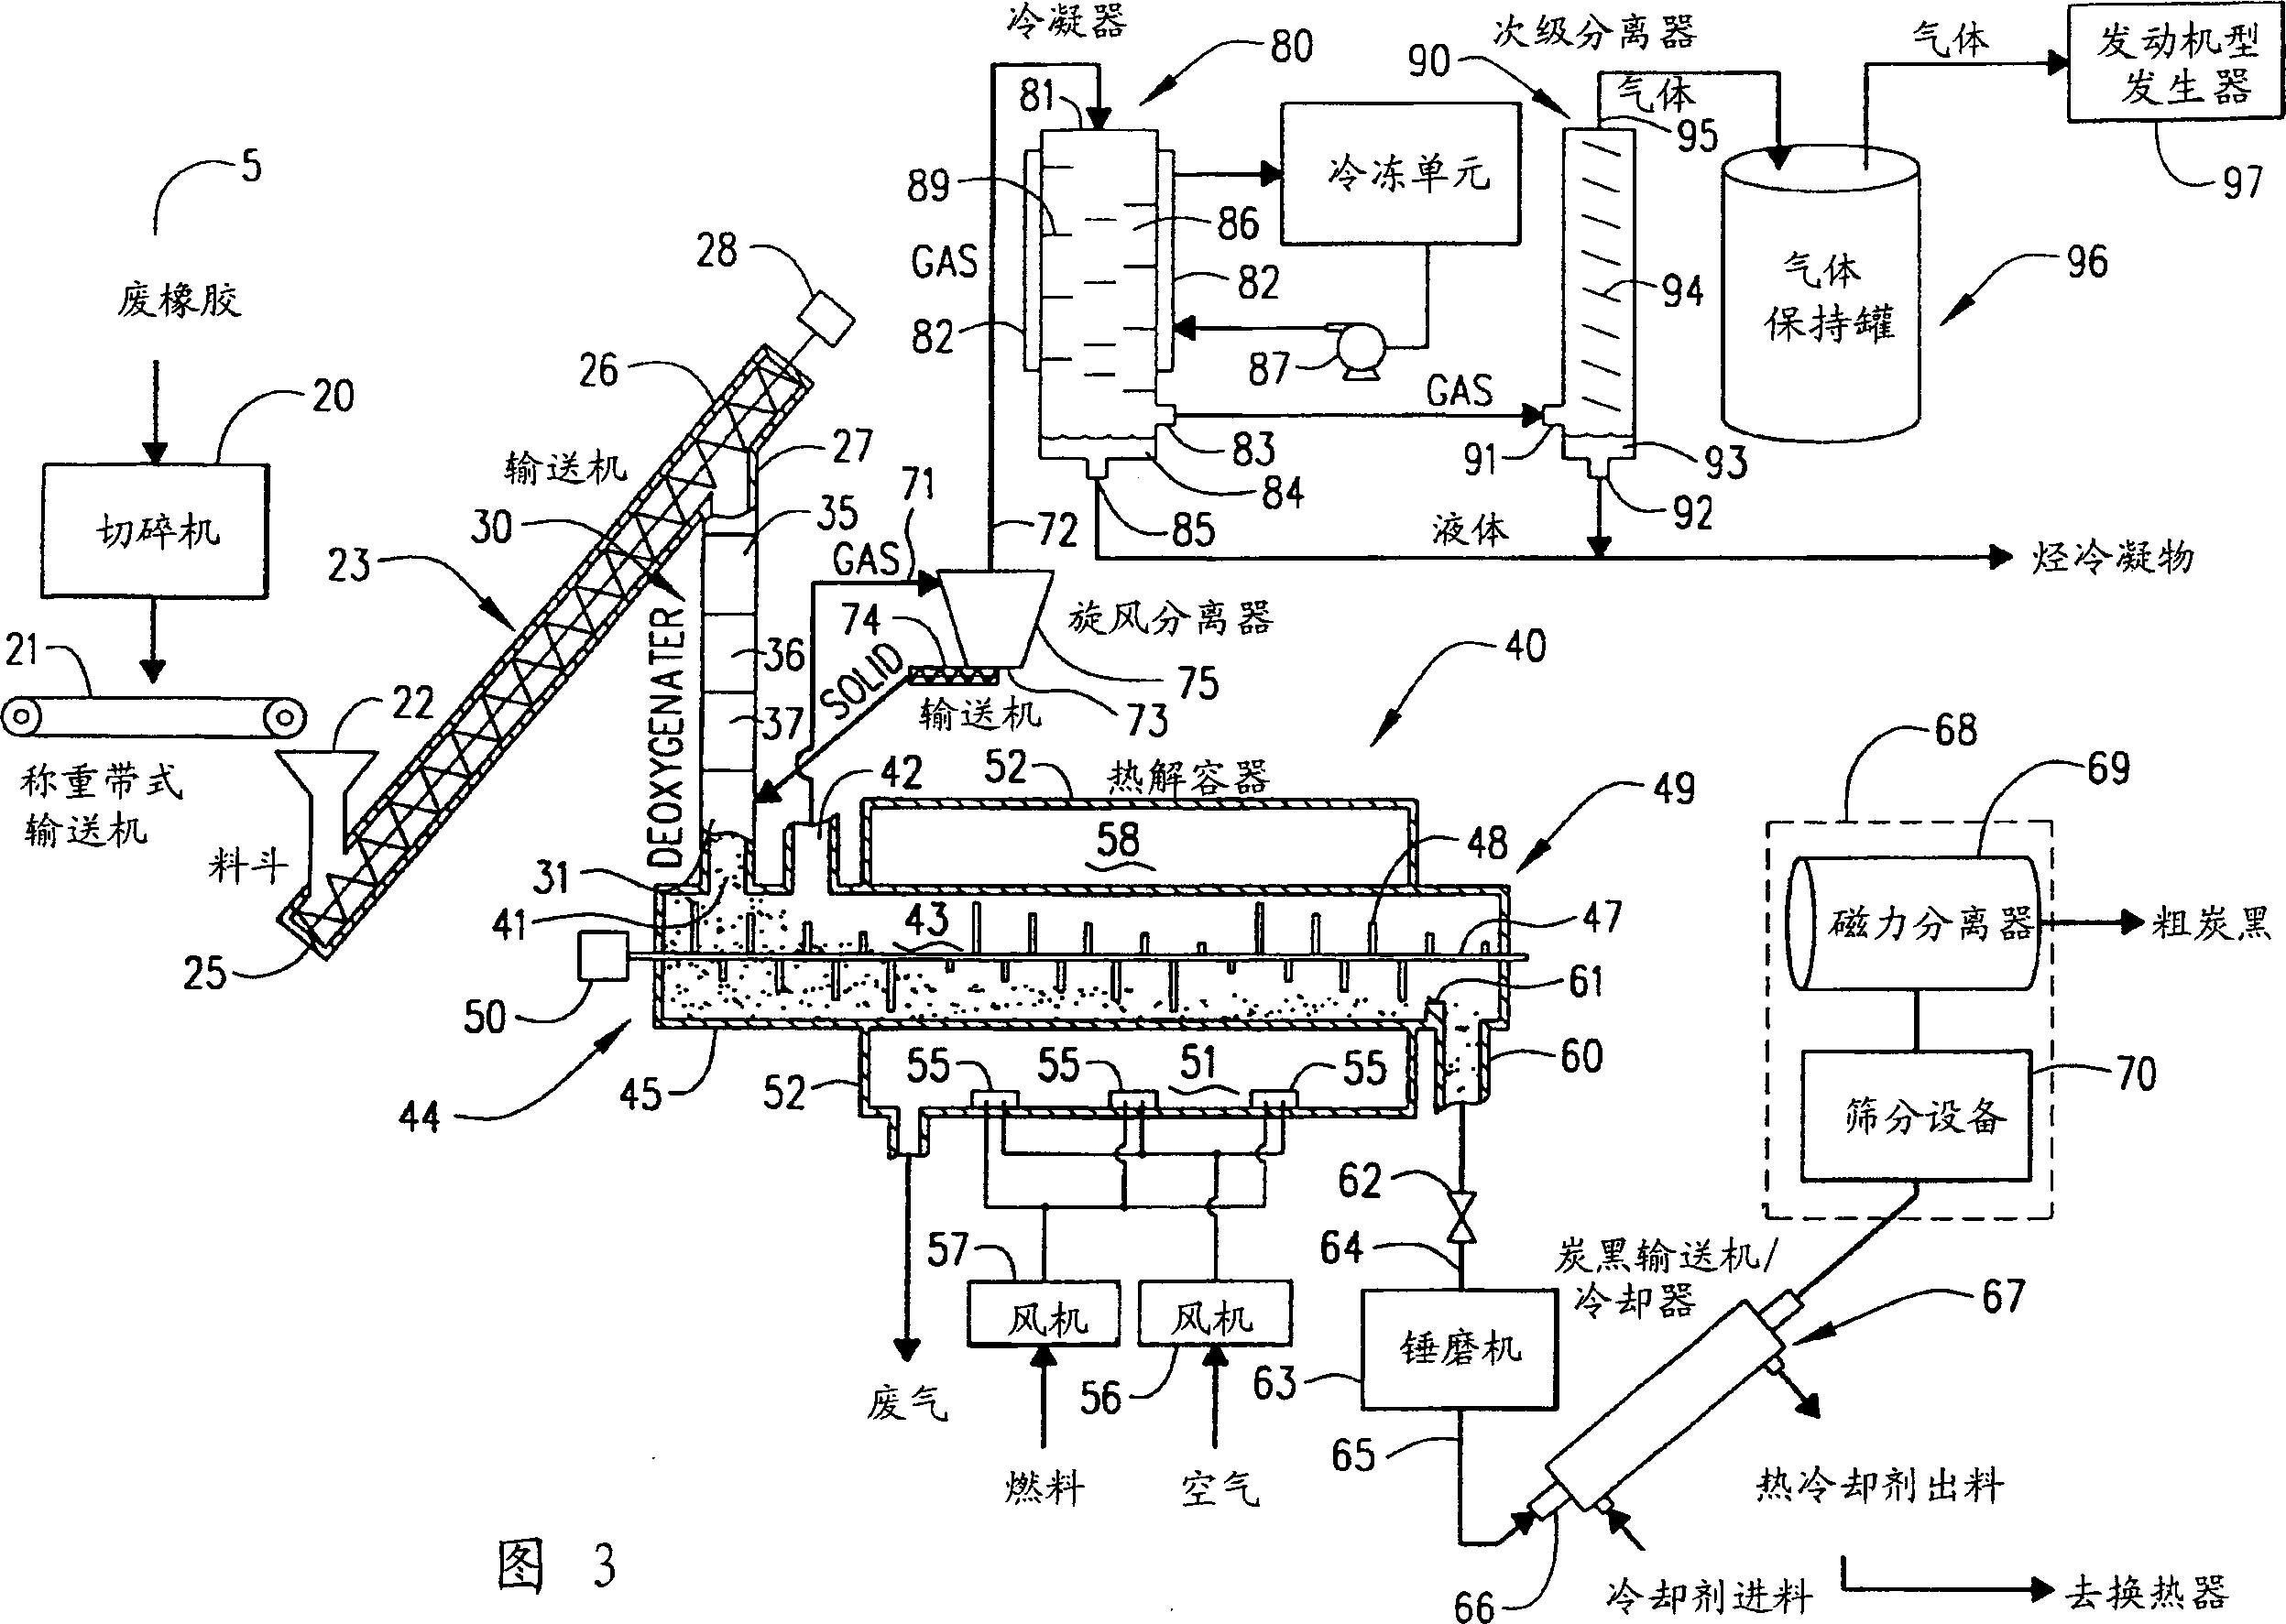 Apparatus and method for recovering marketable products from scrap rubber